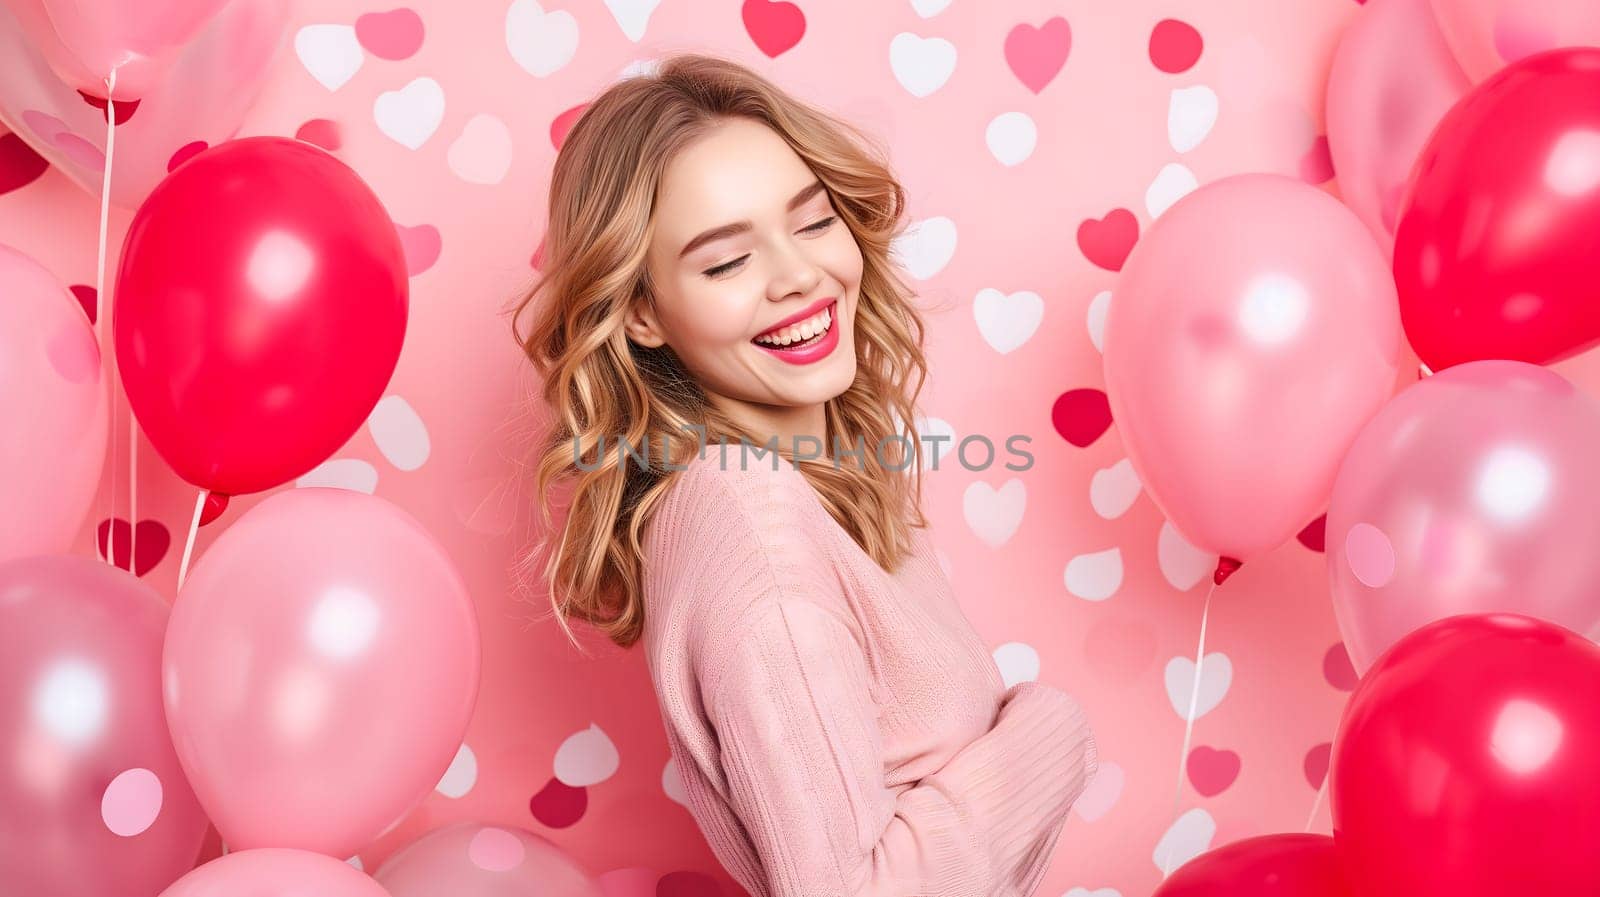 Young adult woman with red and pink air balloons laughing, on pink polka dots background. Happy holiday party. Joyful beauty having fun, celebrating Valentine's Day. by z1b